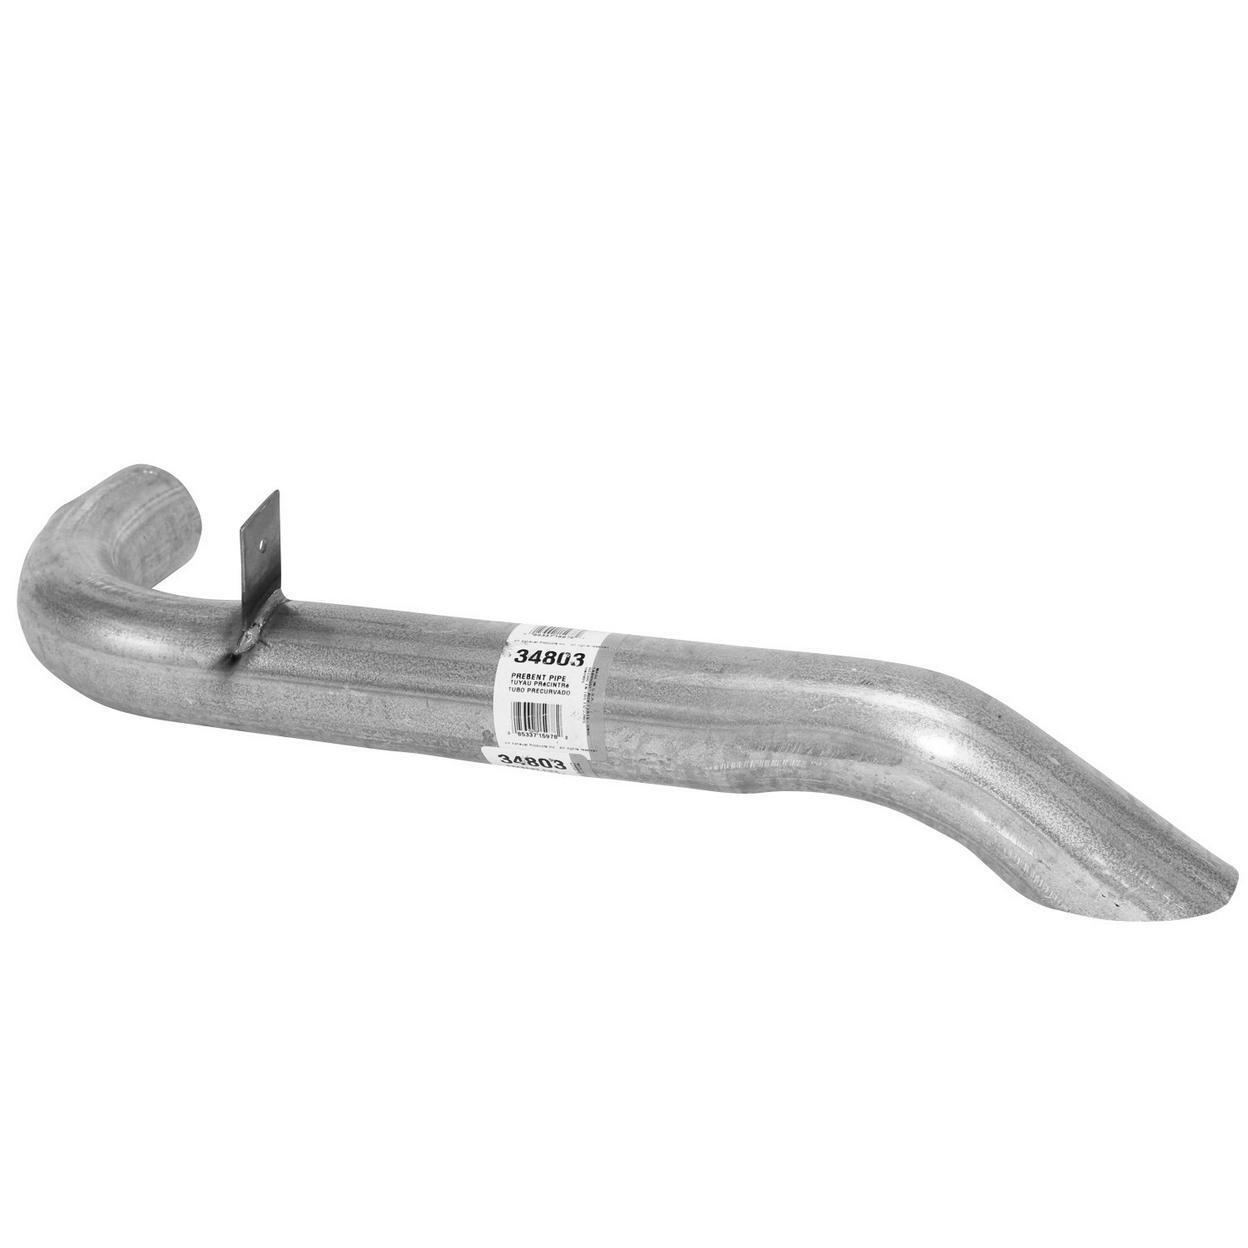 34803-AX Exhaust Tail Pipe Fits 1995 Chevrolet Camaro 3.4L V6 GAS OHV